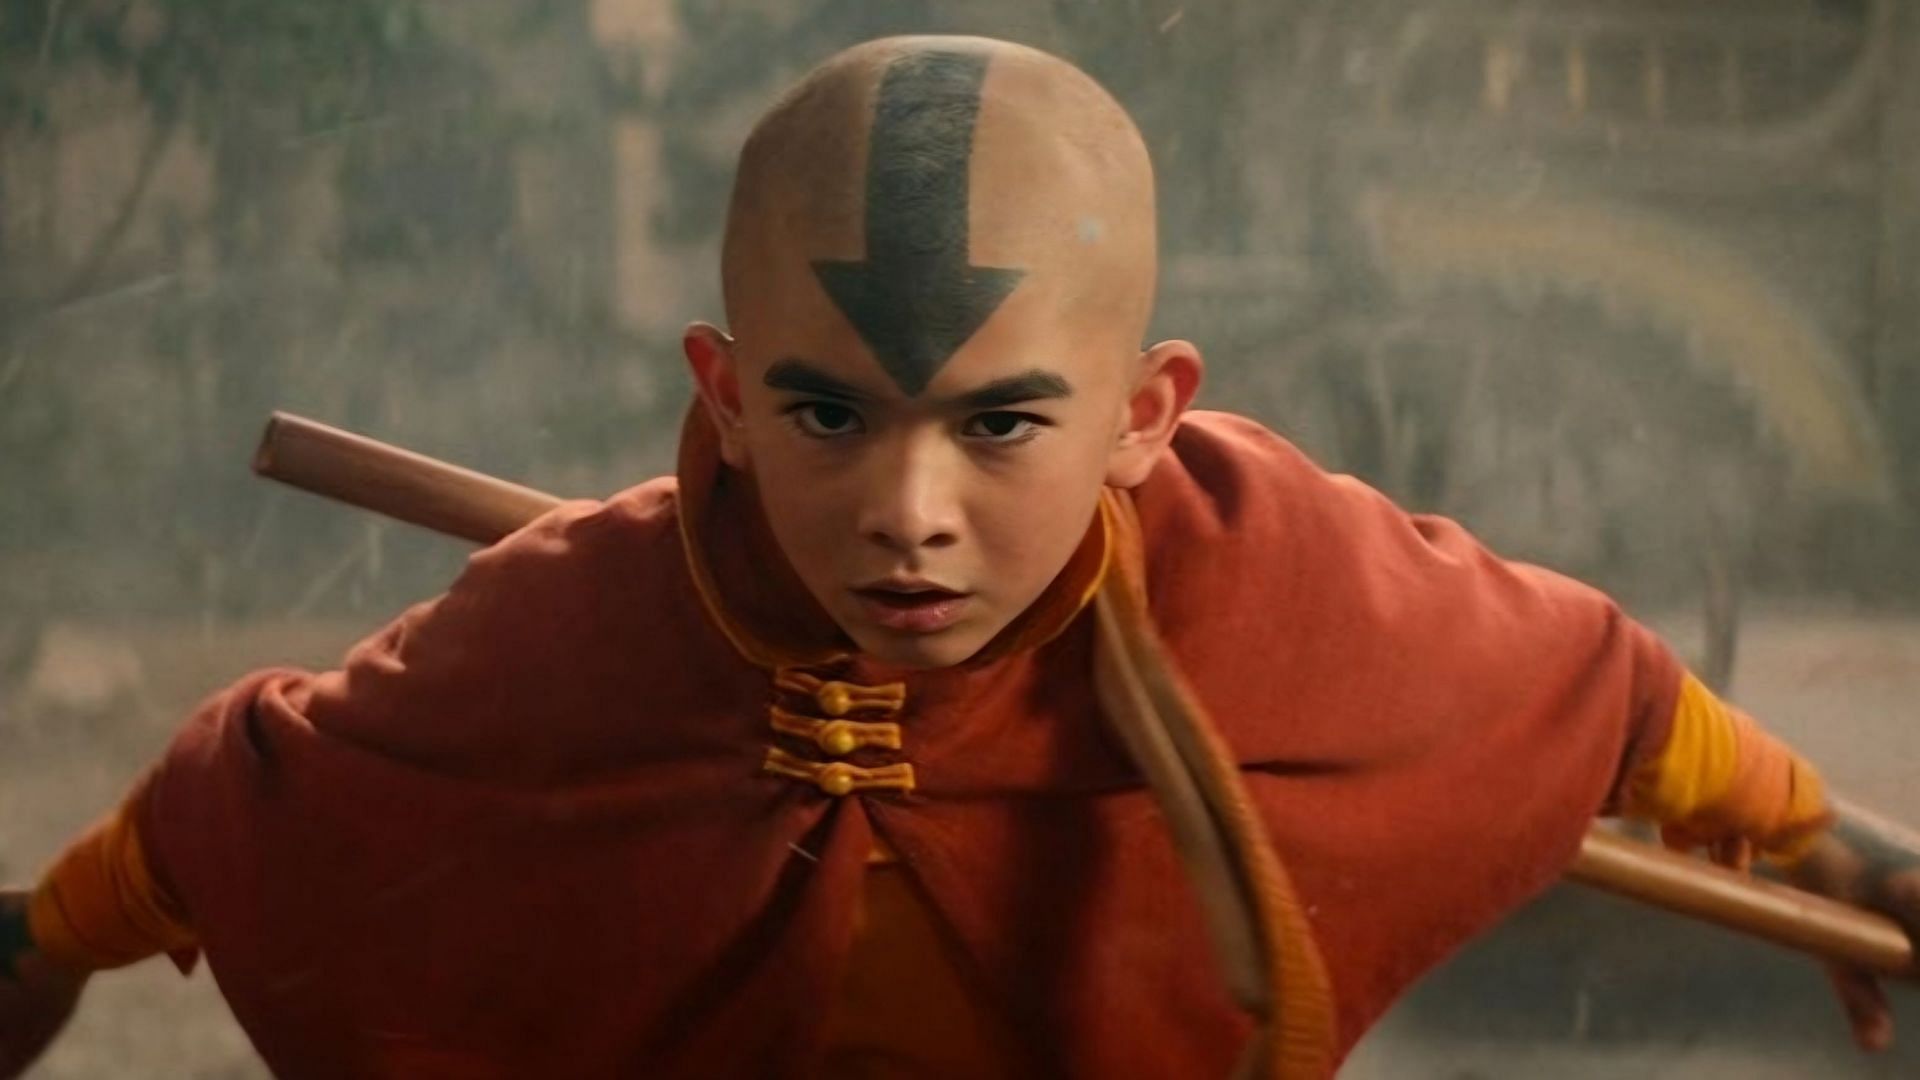 Gordon Cormier in a still from Avatar: The Last Airbender